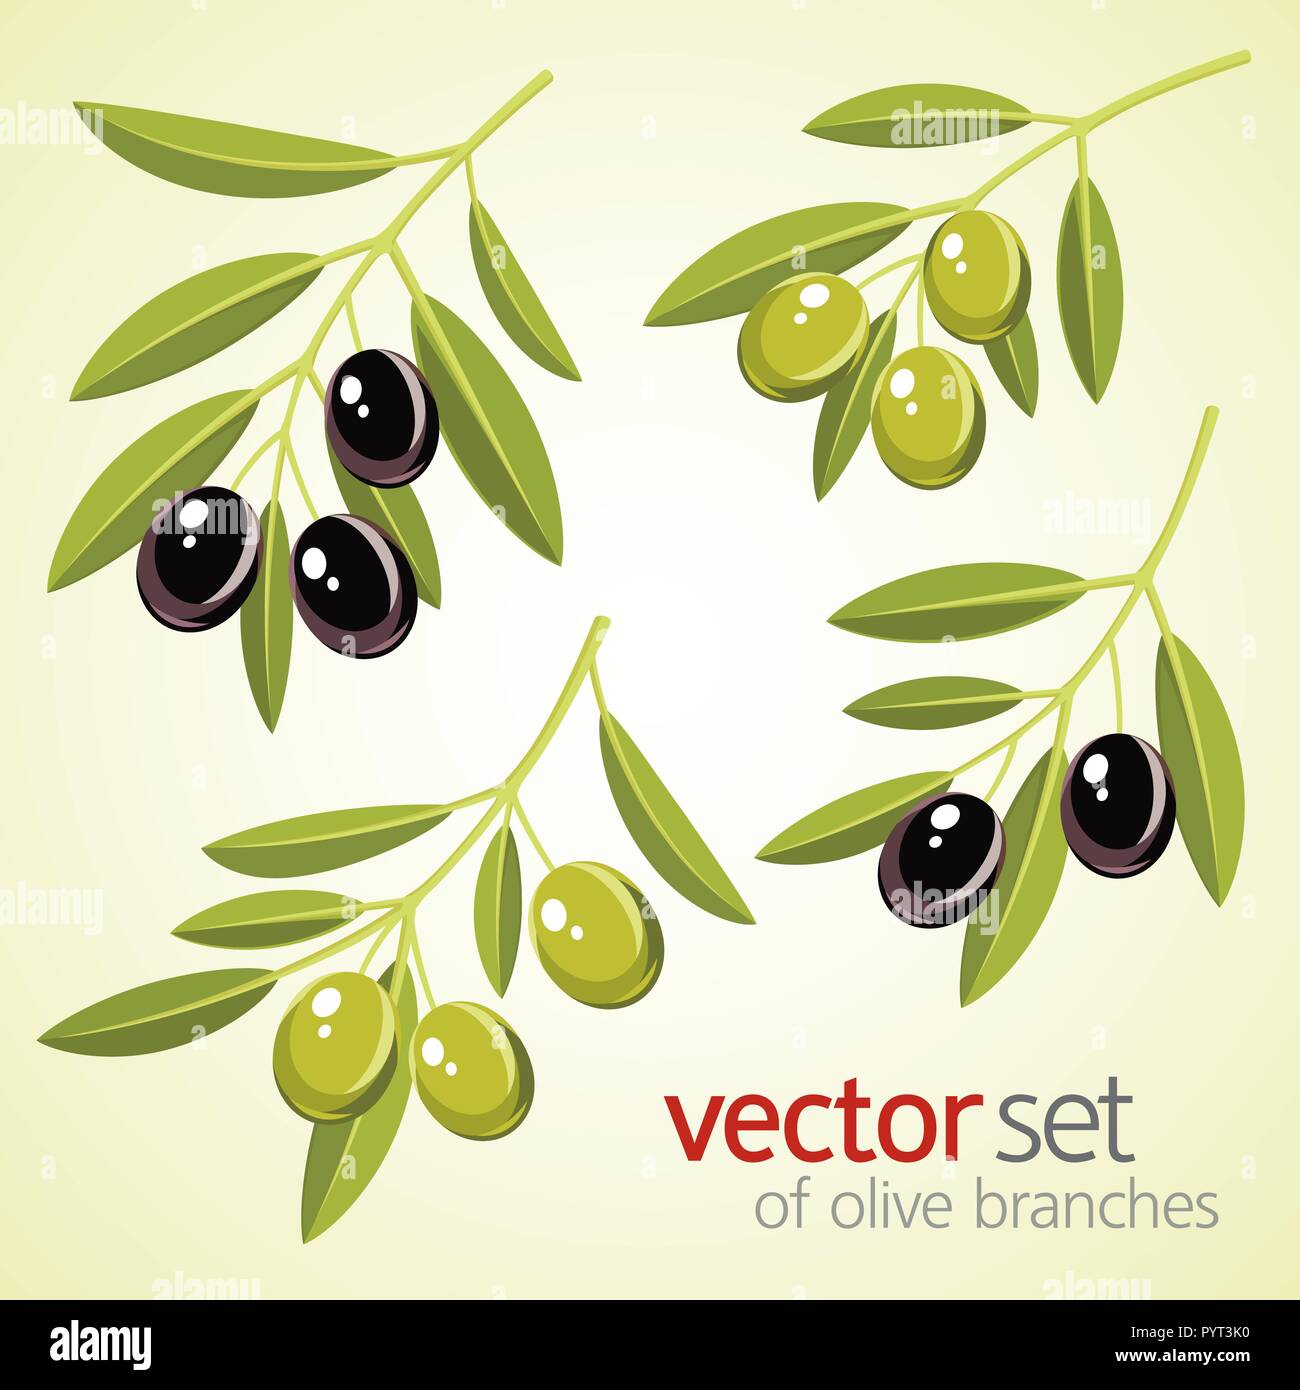 Vector set of olive branches. Green and black olives Stock Vector